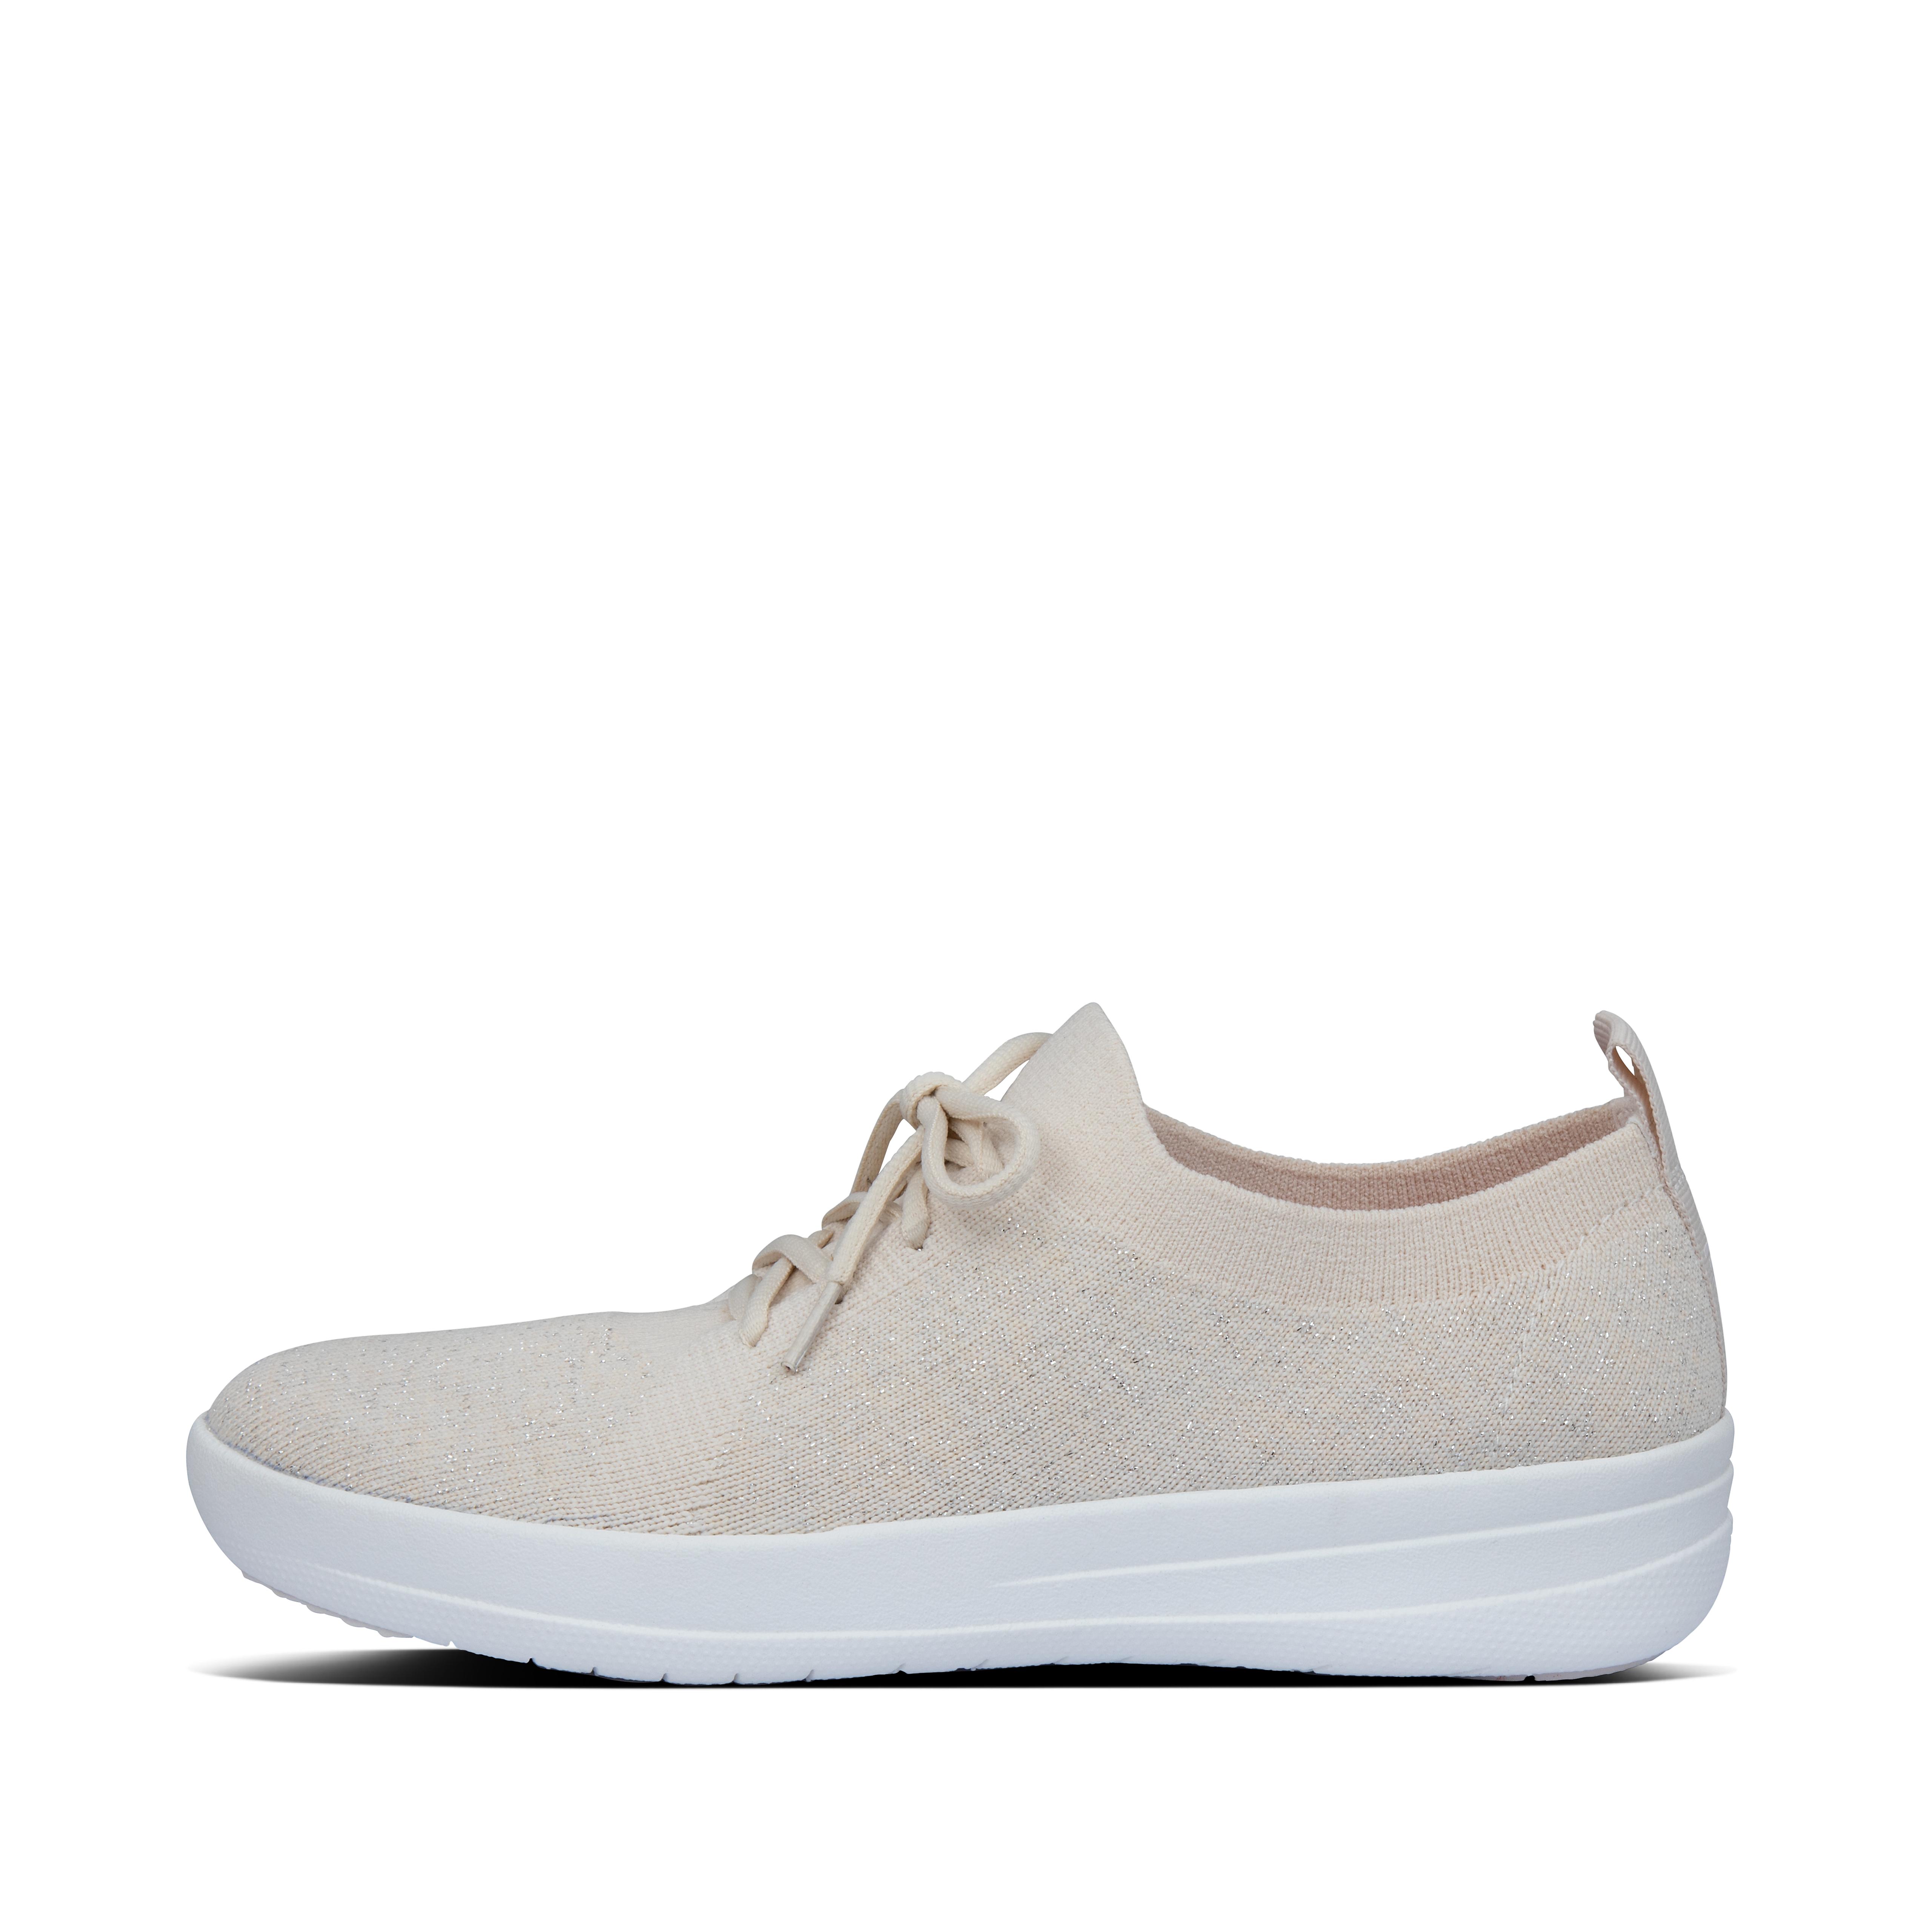 F-SPORTY Sneakers | FitFlop US | FitFlop US